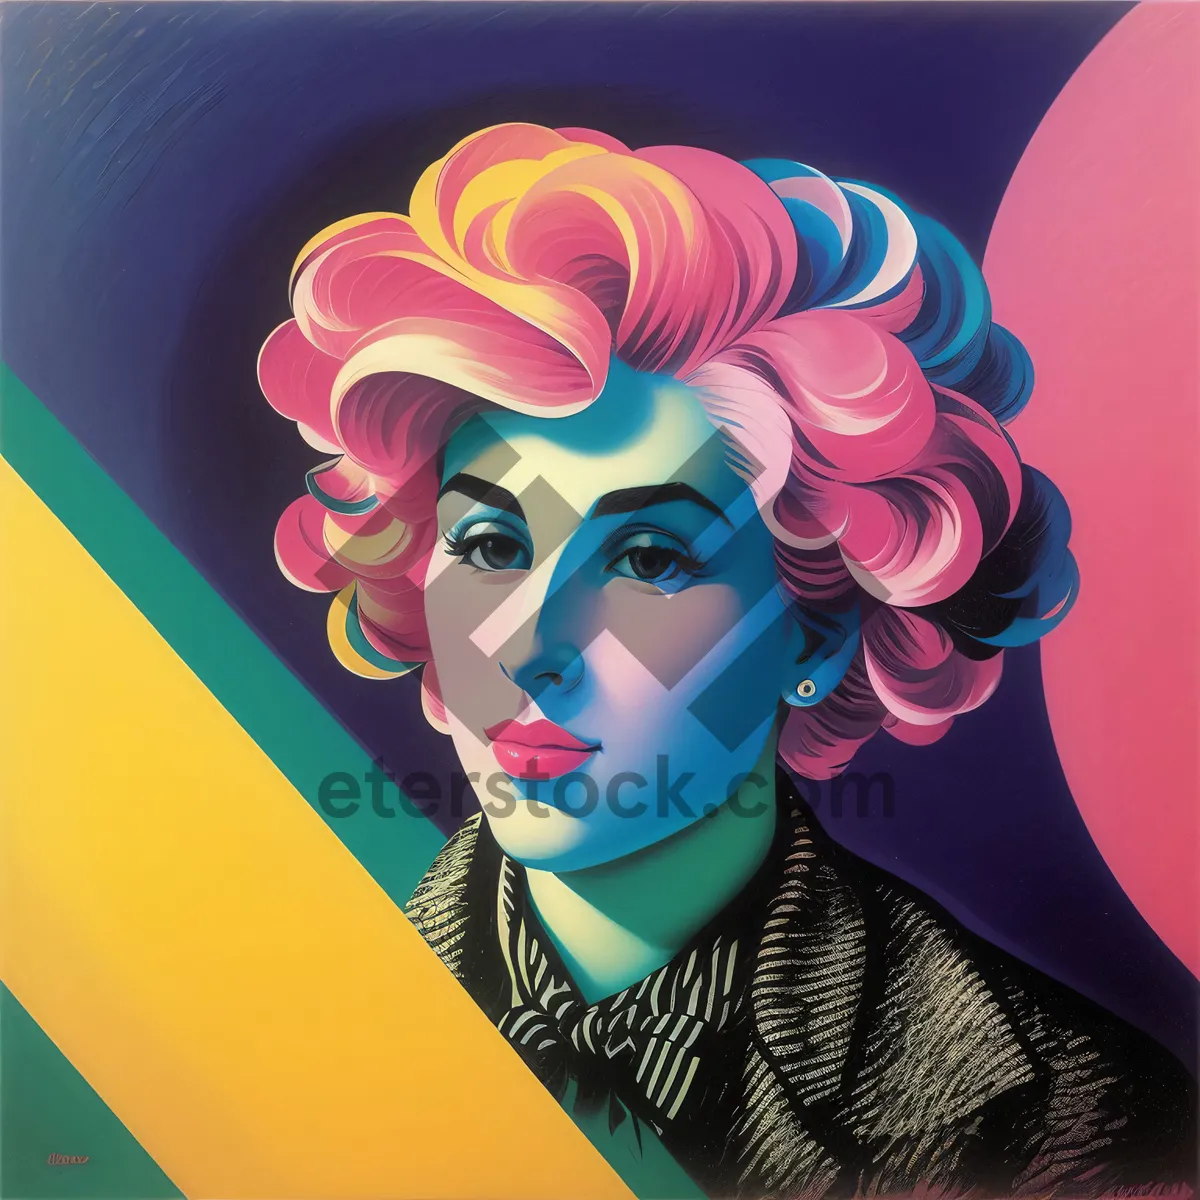 Picture of Cartoon Person with Colorful Hair and Artistic Face